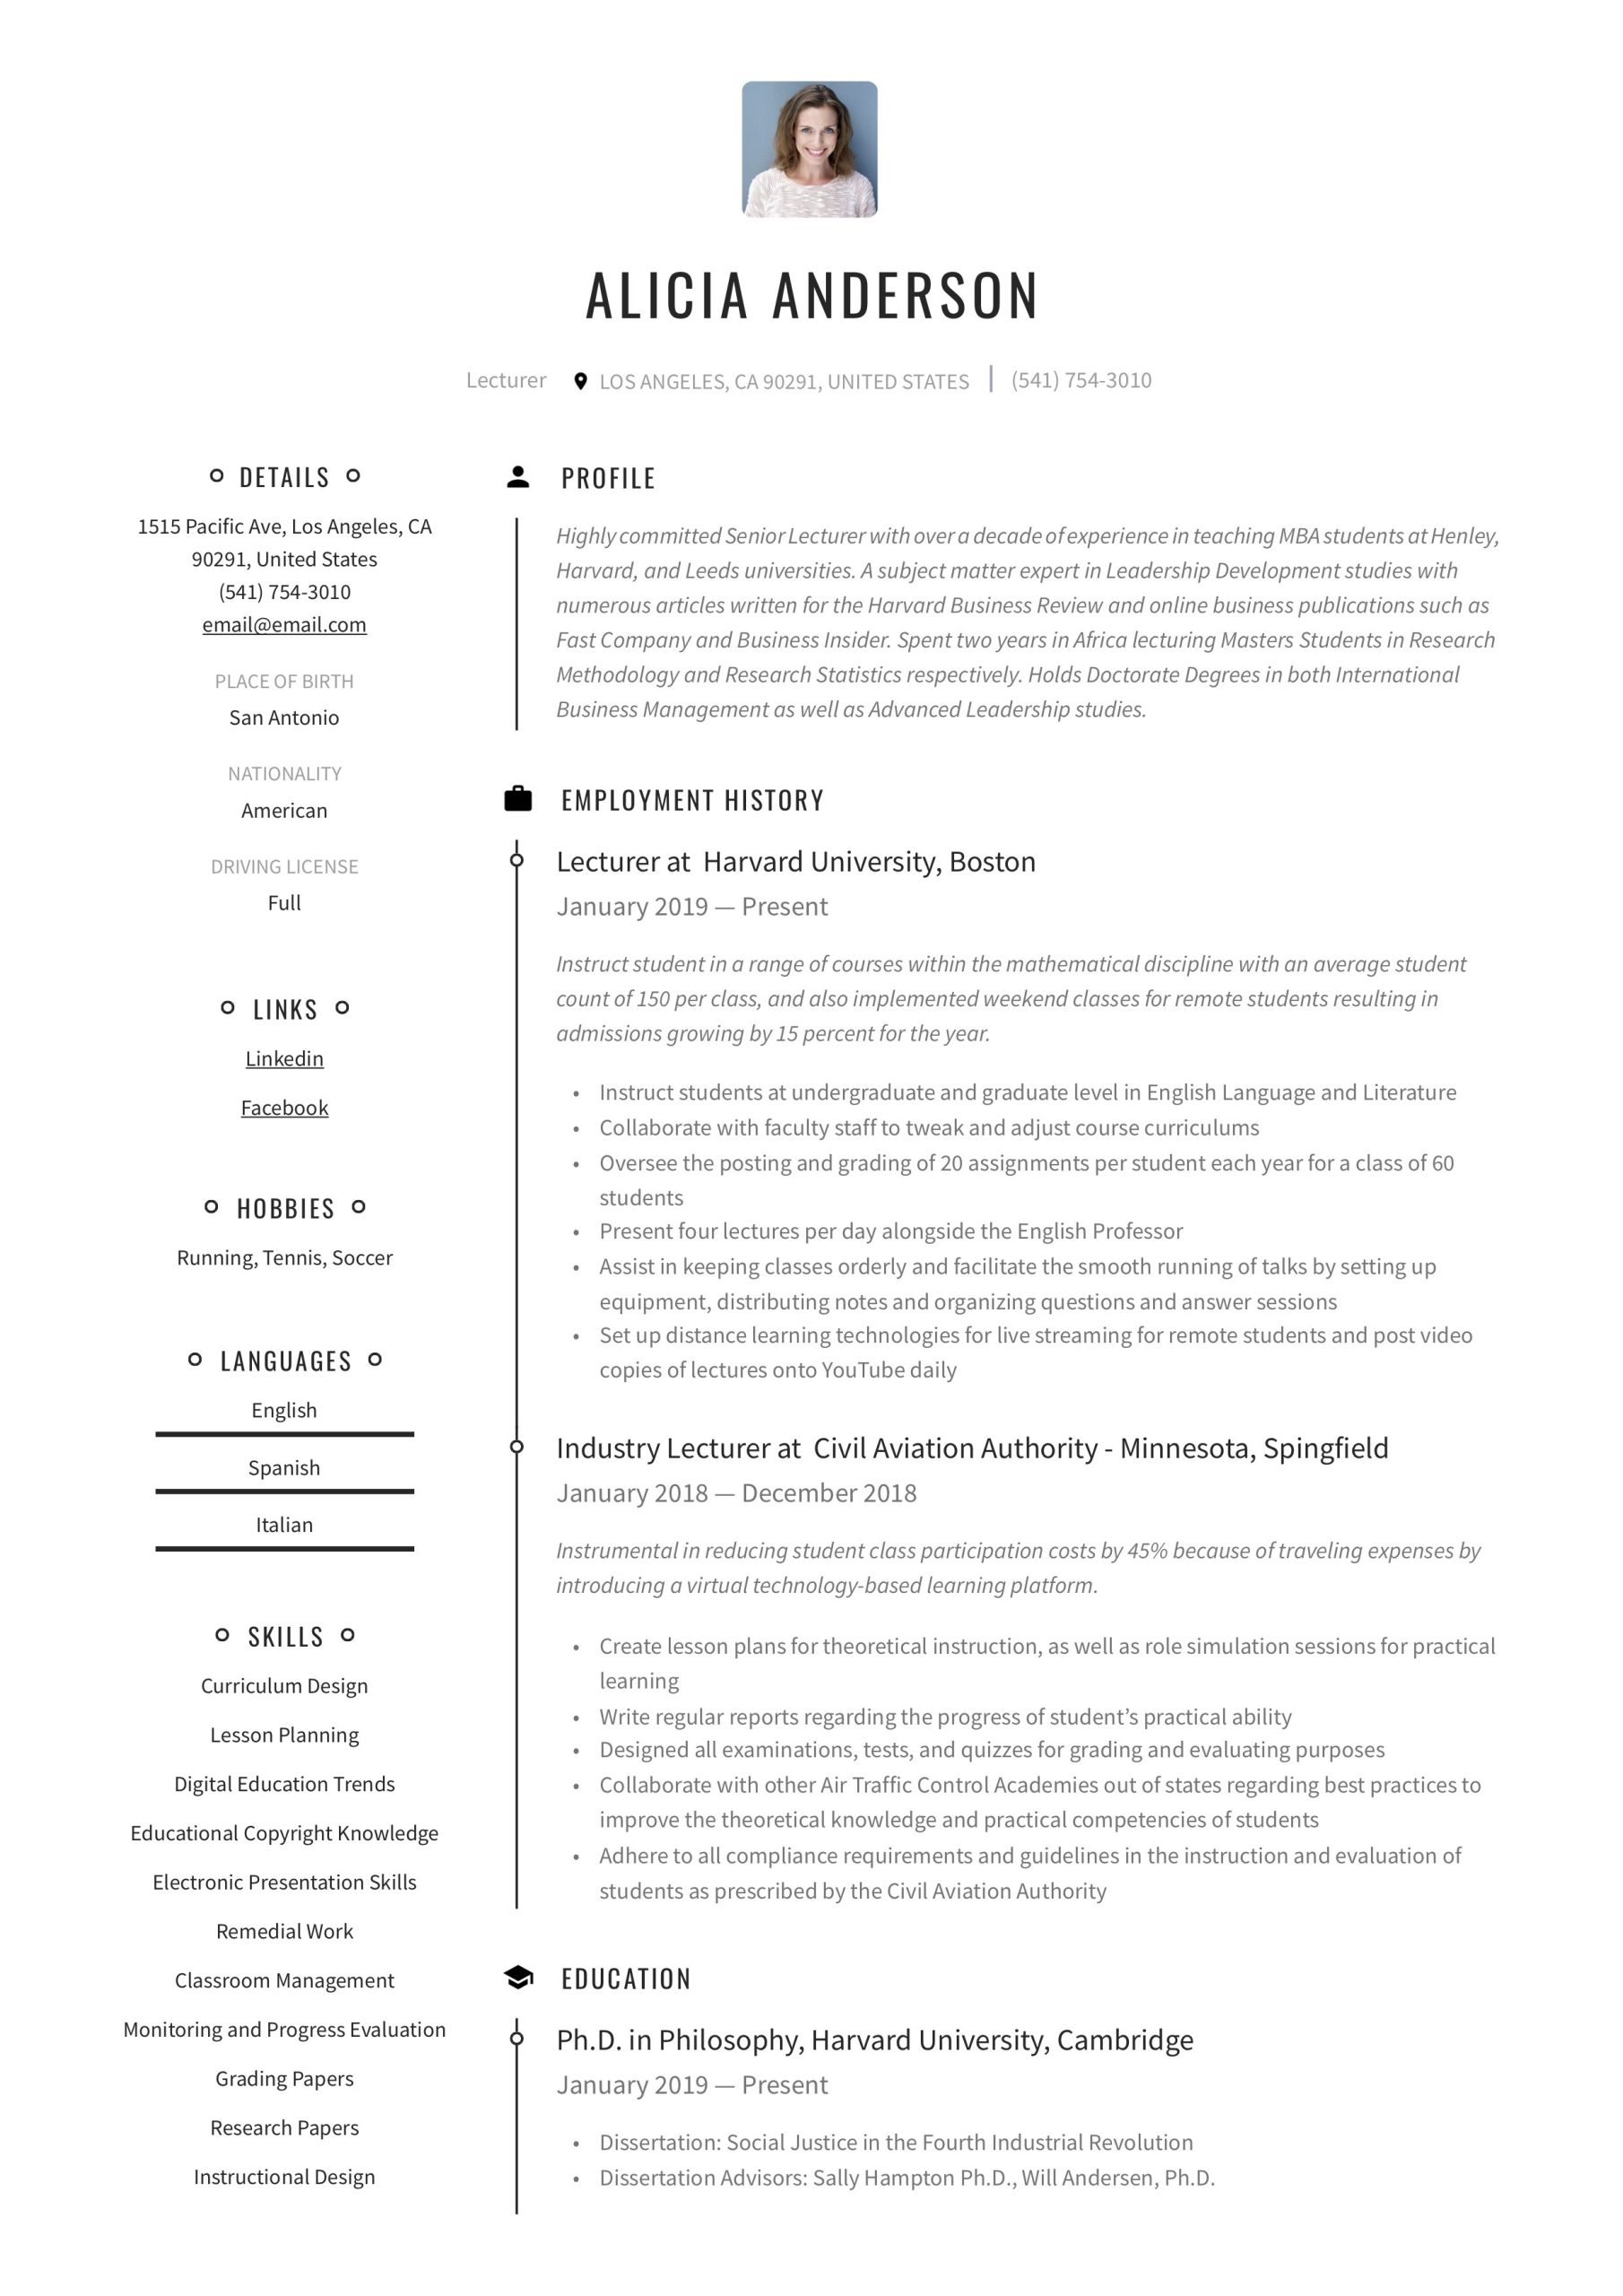 Resume Samples for Academic Positions In Education Lecturer Resume & Writing Guide  18 Free Examples 2020